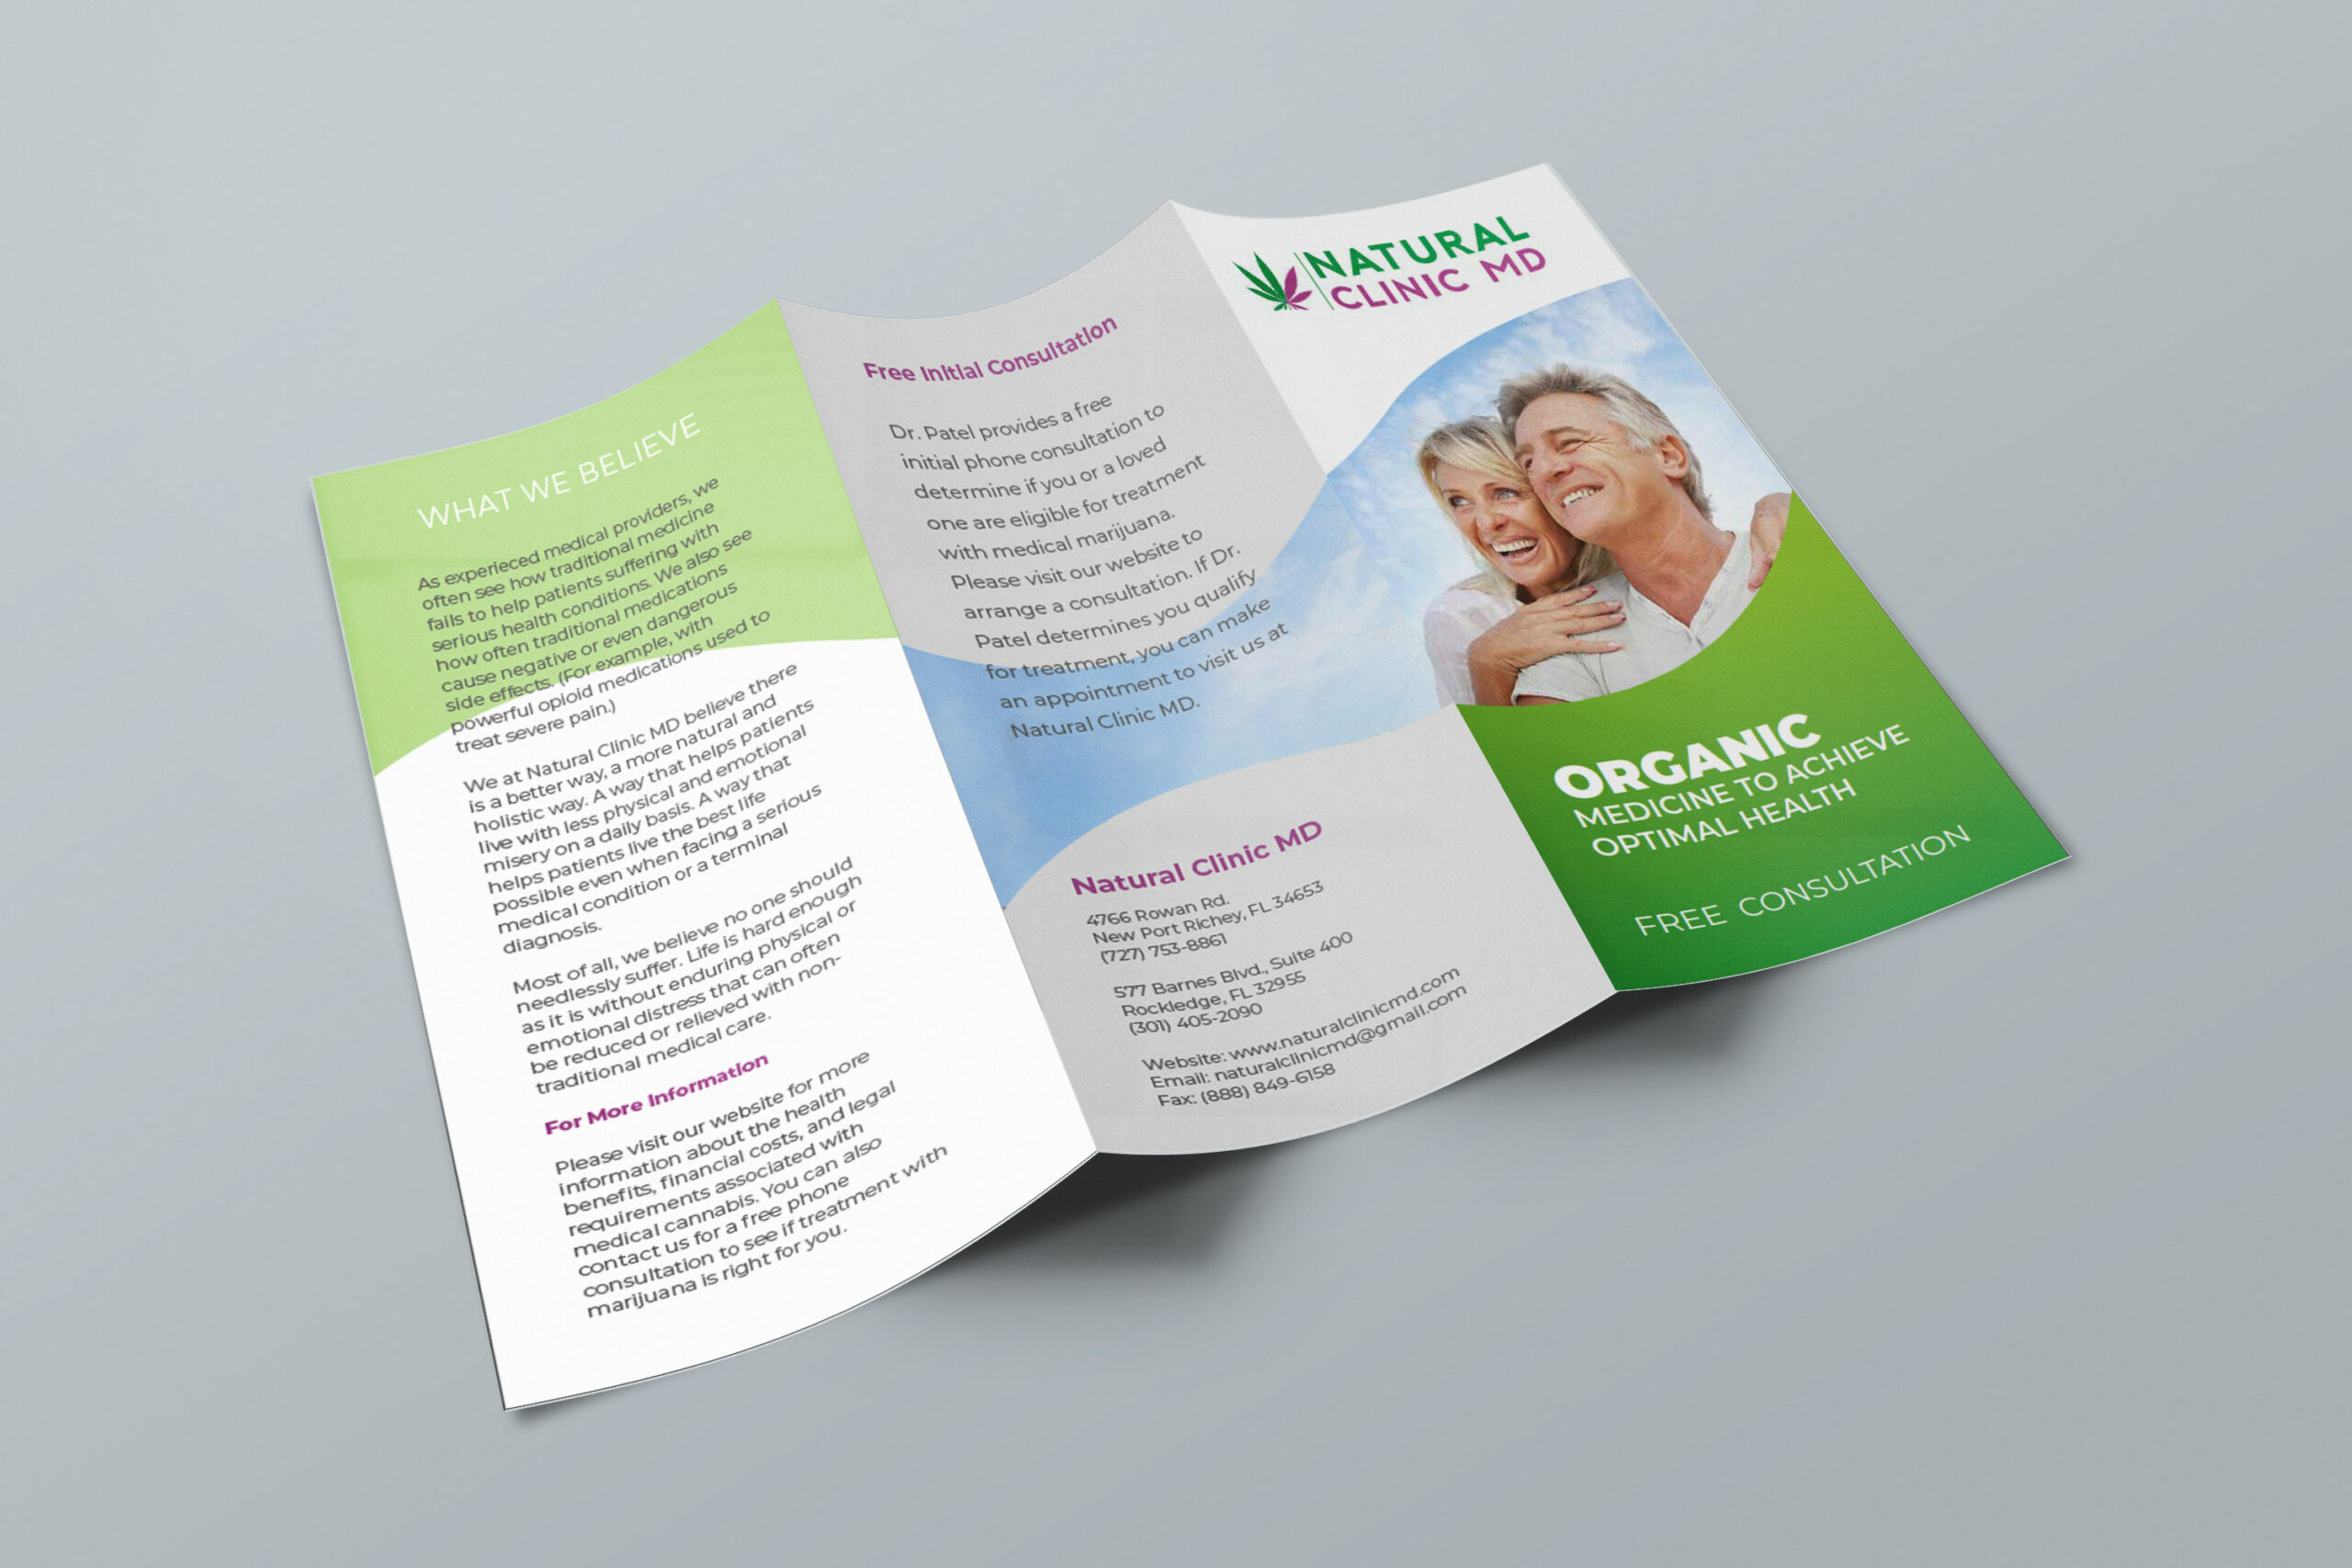 Natural Clinic MD Brochure outside